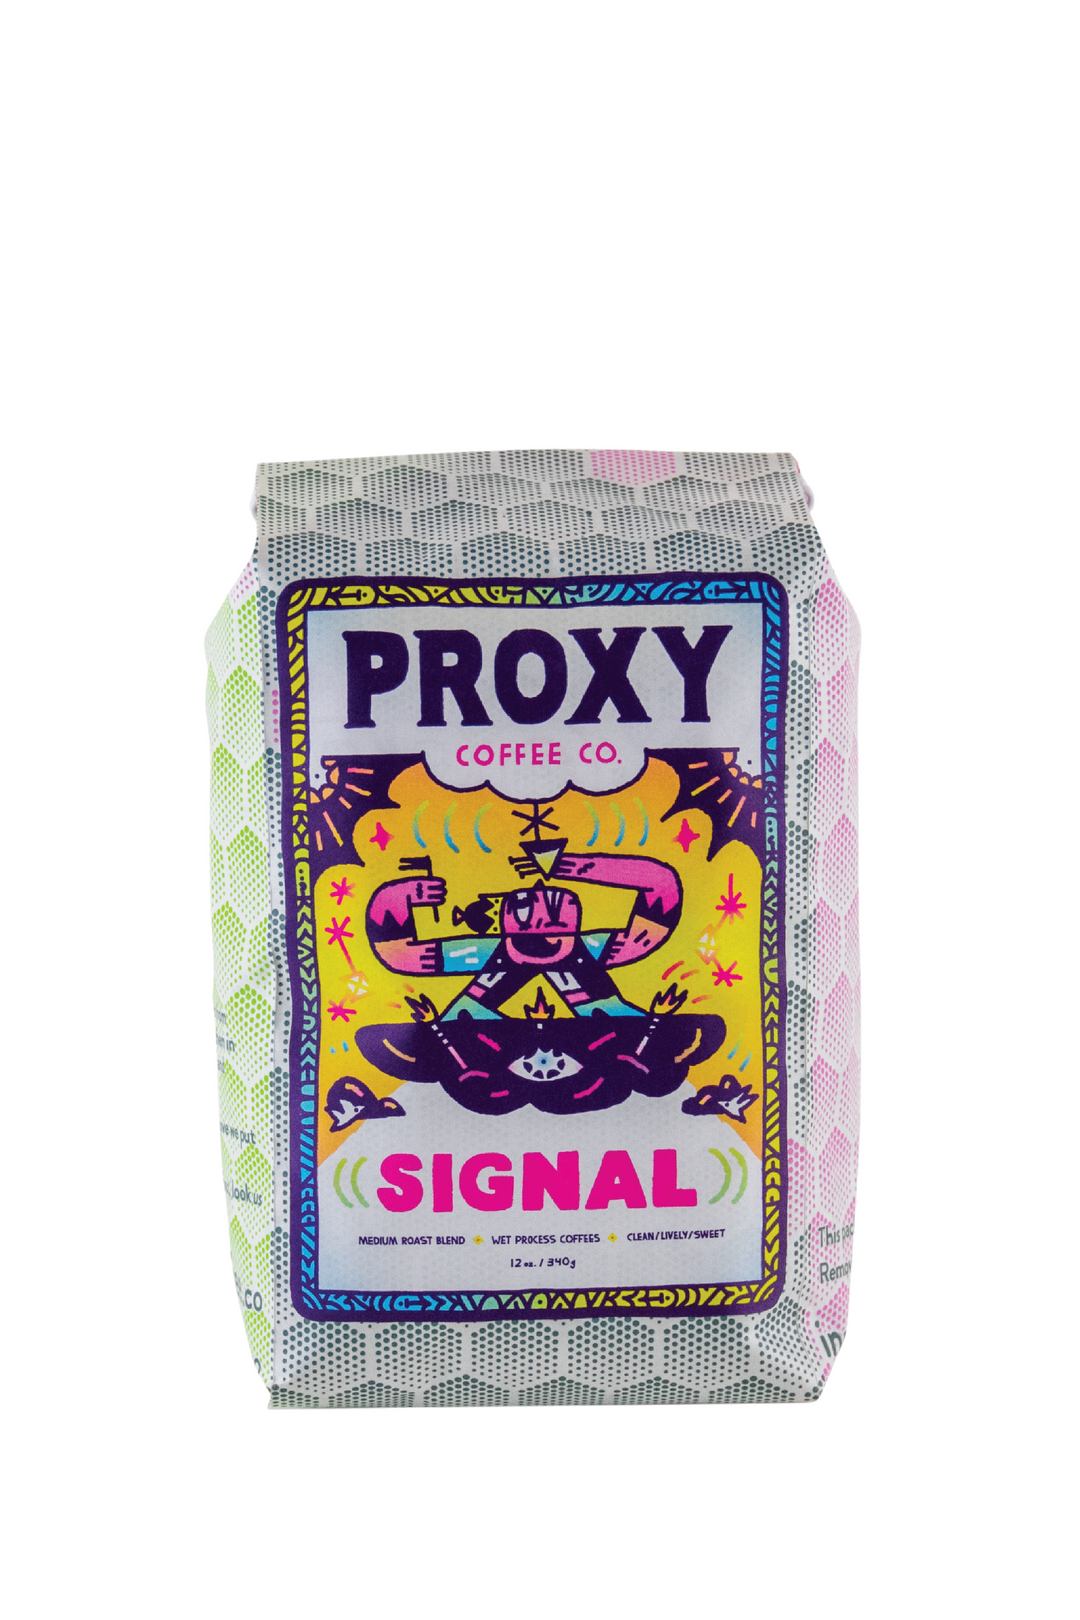 Photograph of a 12 oz/340g bag of Proxy Coffee Co.'s Signal medium roast Signal blend on a white background.